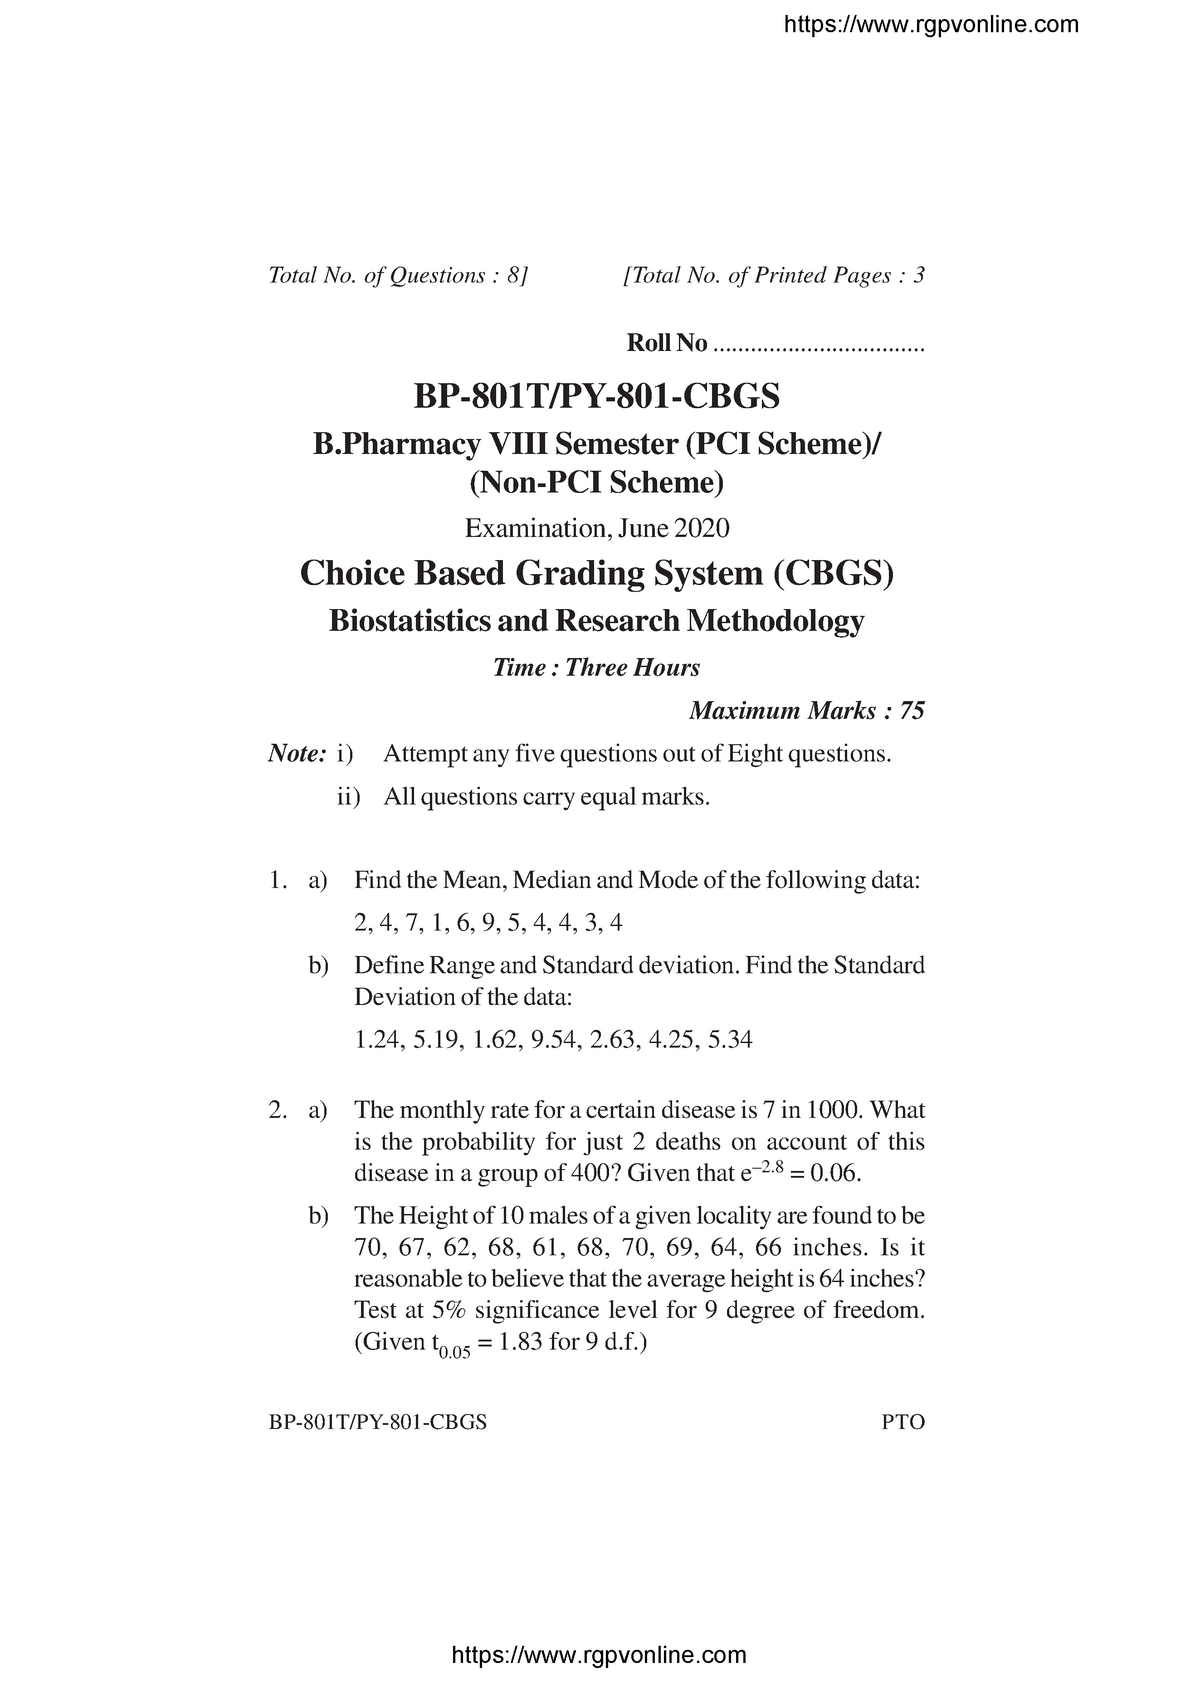 research methodology and biostatistics question paper m pharm